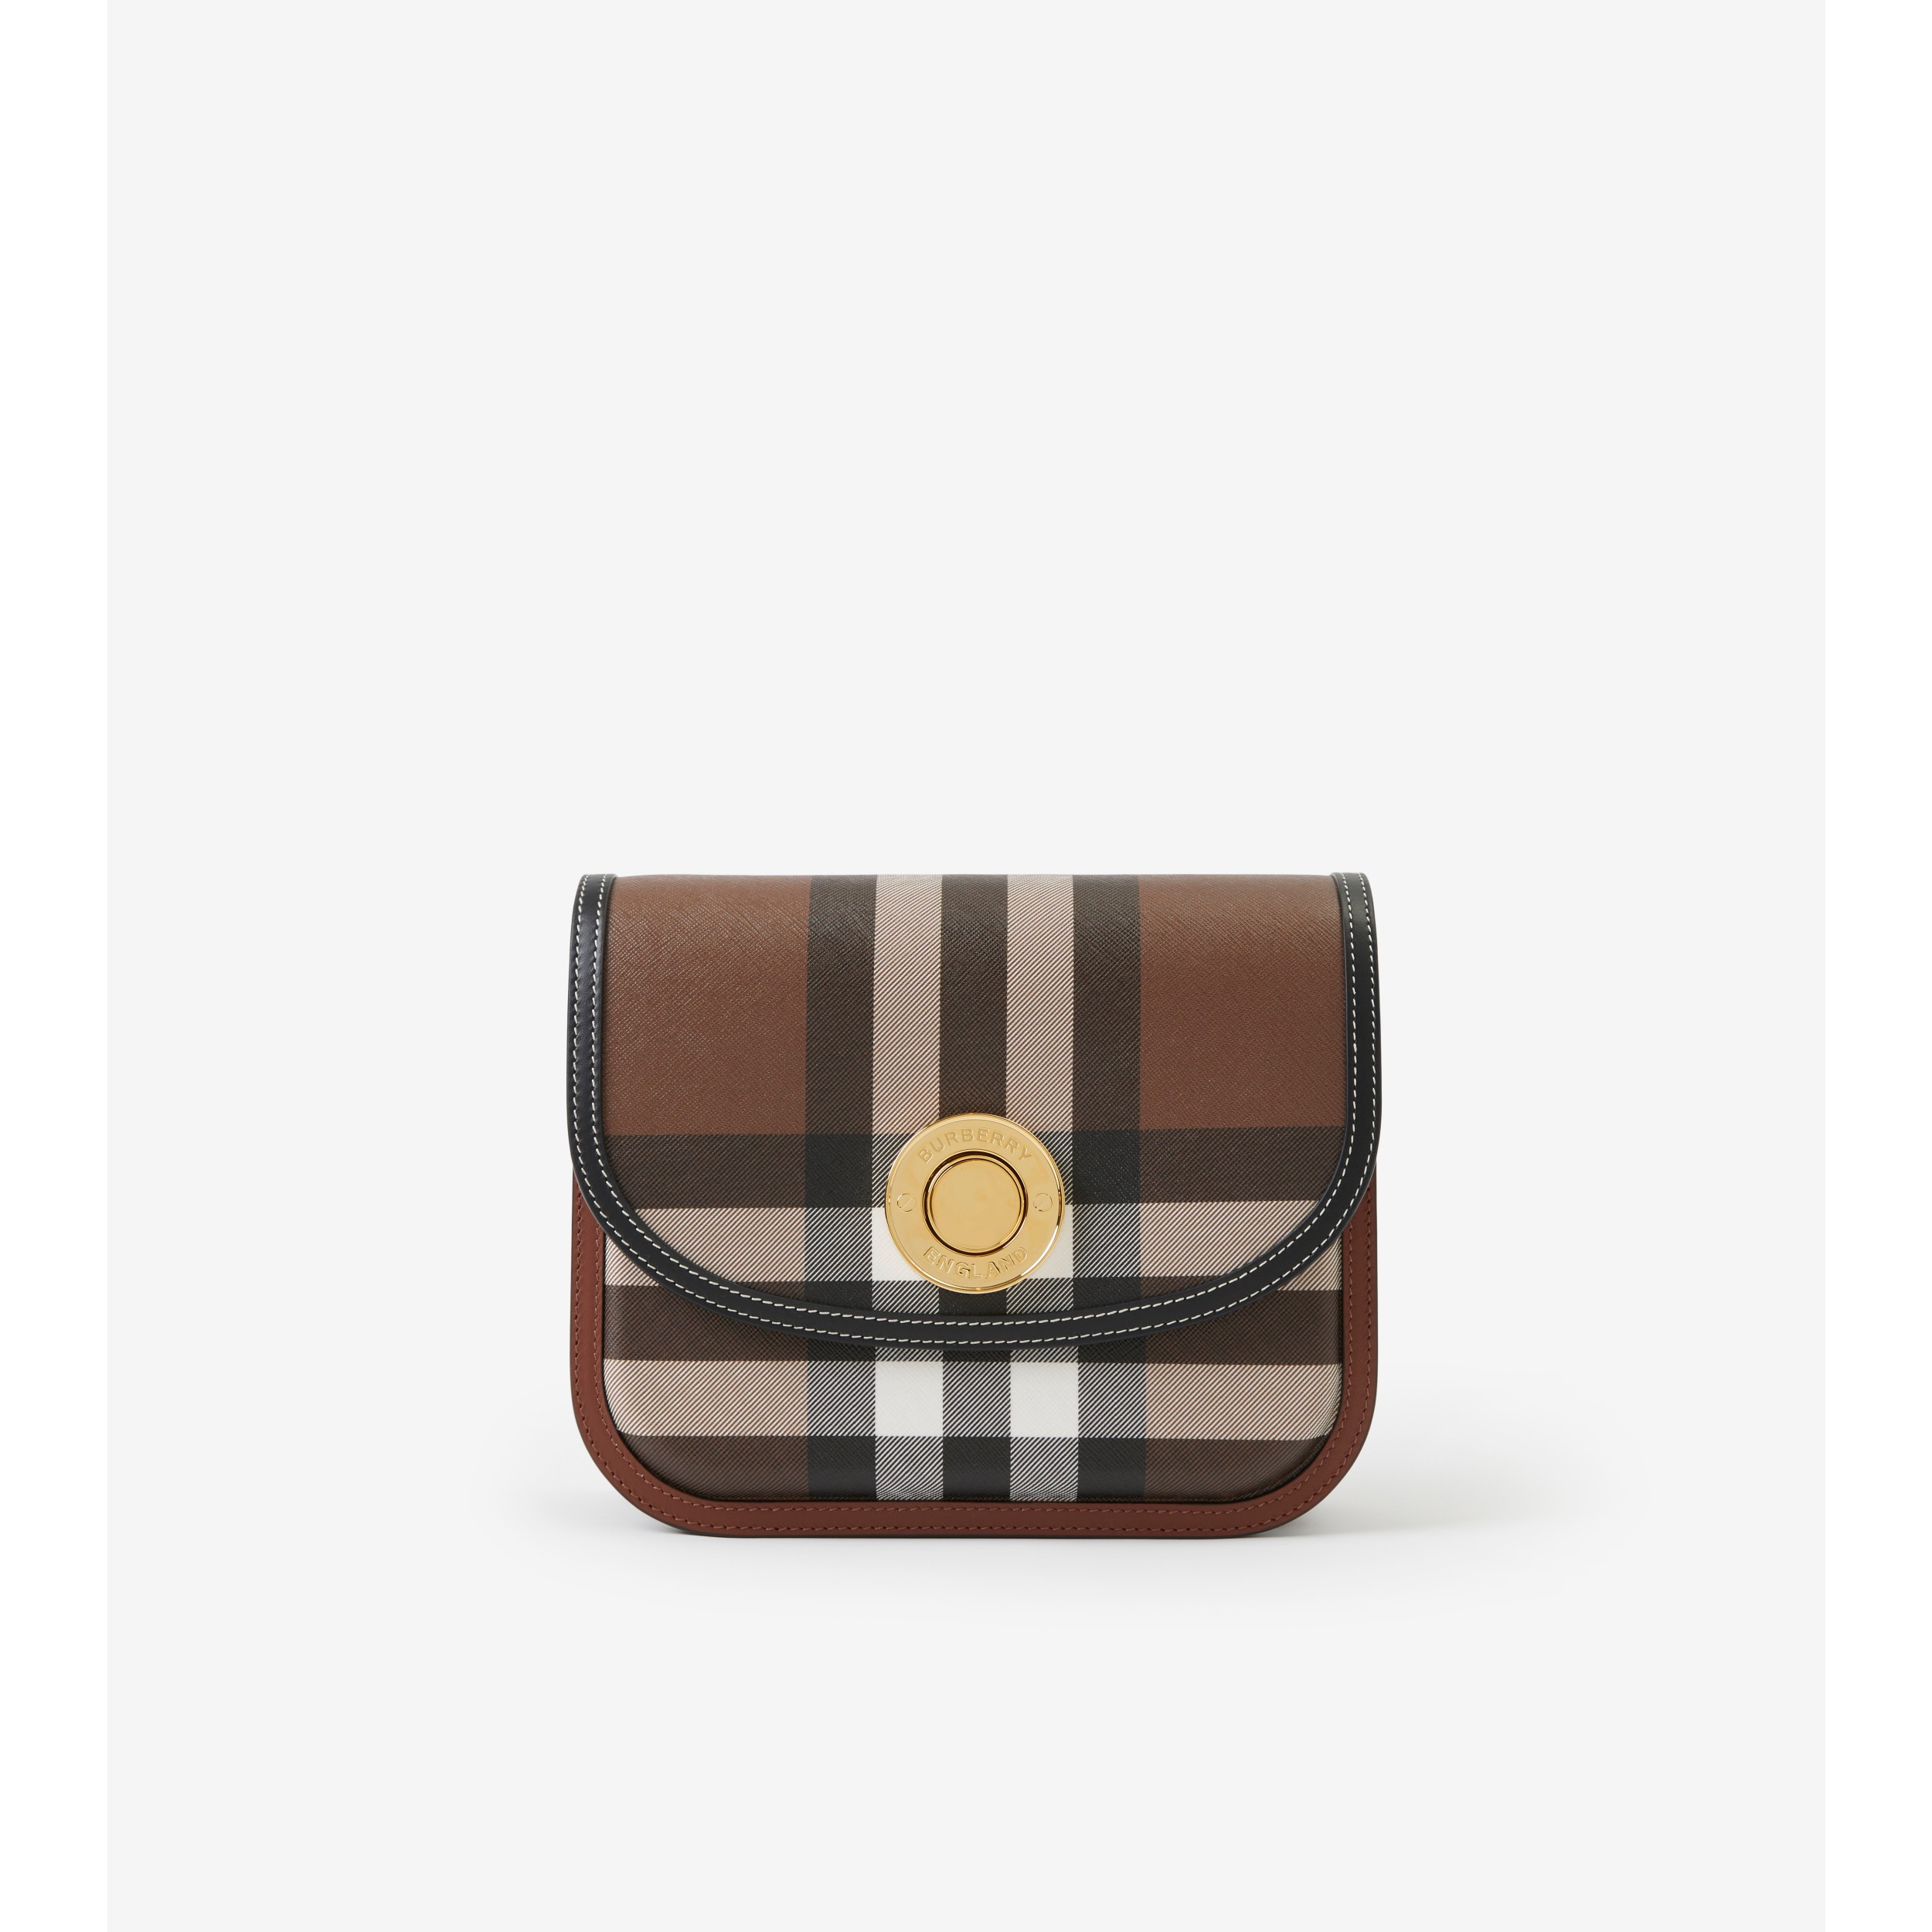 BURBERRY: Elisabeth bag in coated fabric with Dark Birch print - Brown